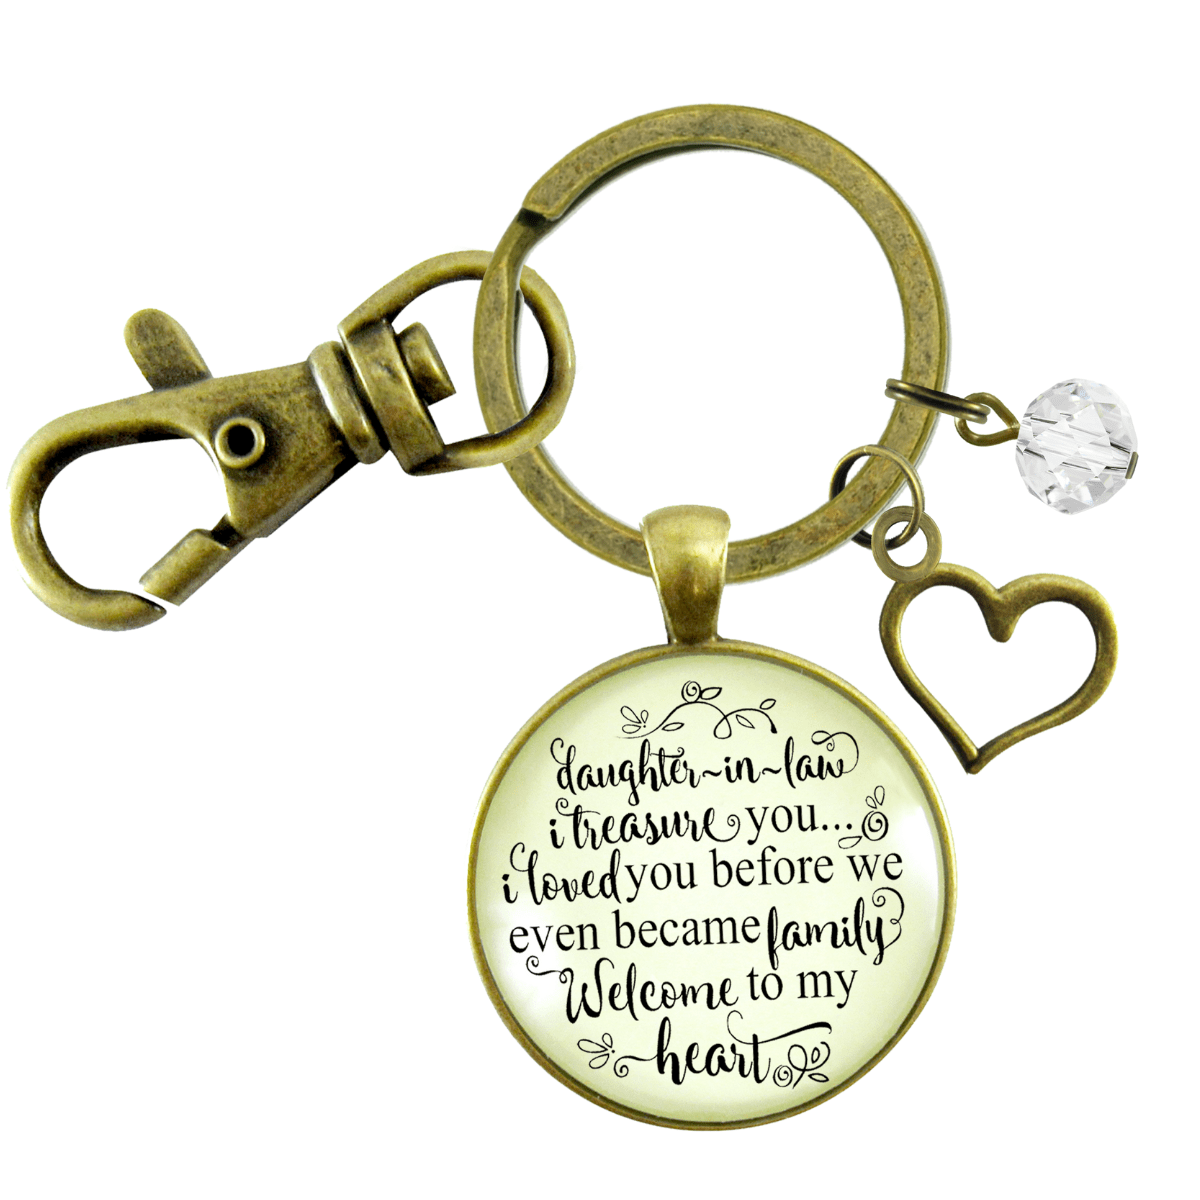 Daughter In Law Keychain I Treasure You Love Family Welcome Meaningful Jewelry - Gutsy Goodness Handmade Jewelry;Daughter In Law Keychain I Treasure You Love Family Welcome Meaningful Jewelry - Gutsy Goodness Handmade Jewelry Gifts